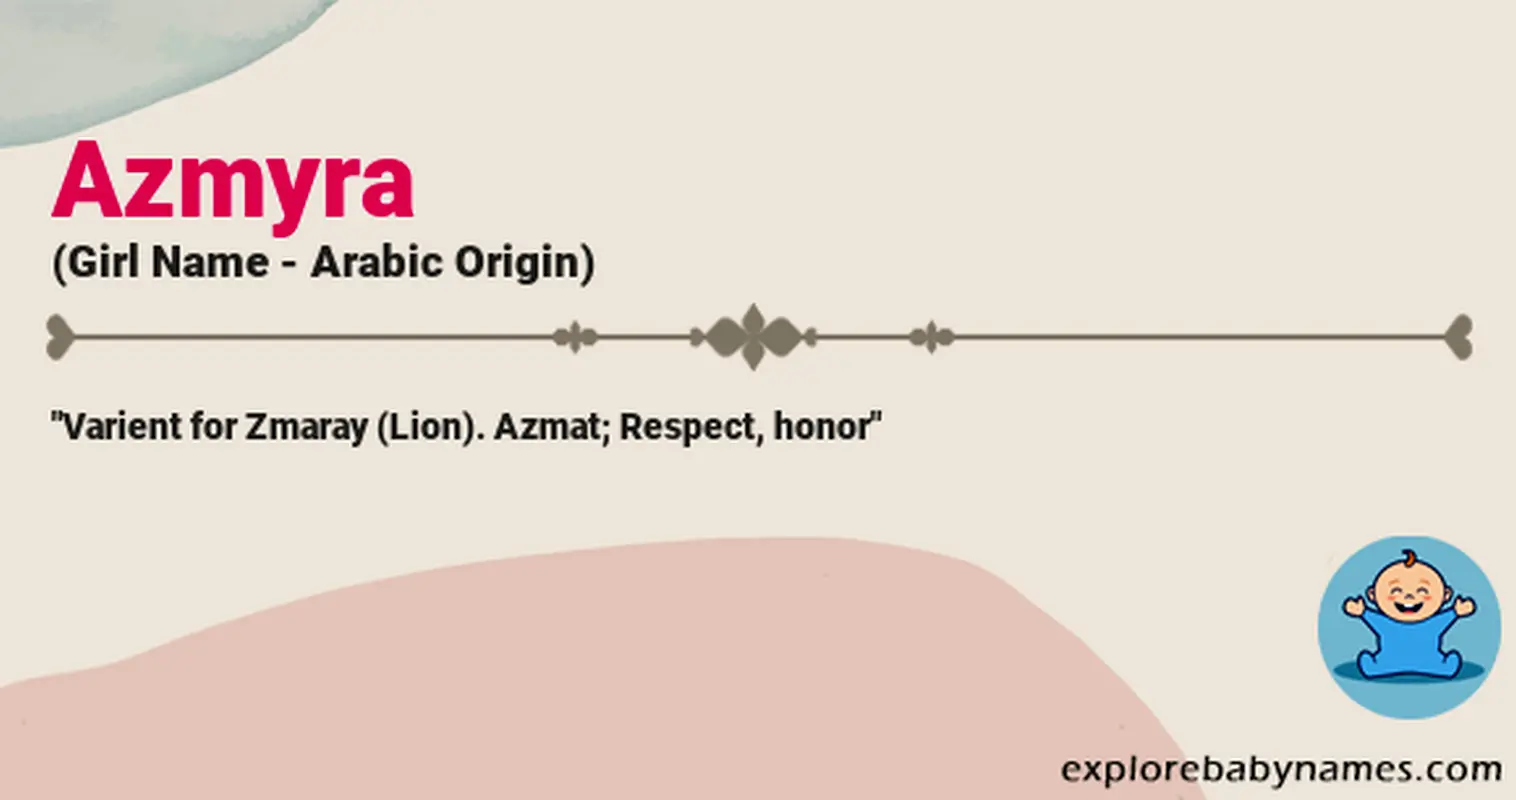 Meaning of Azmyra